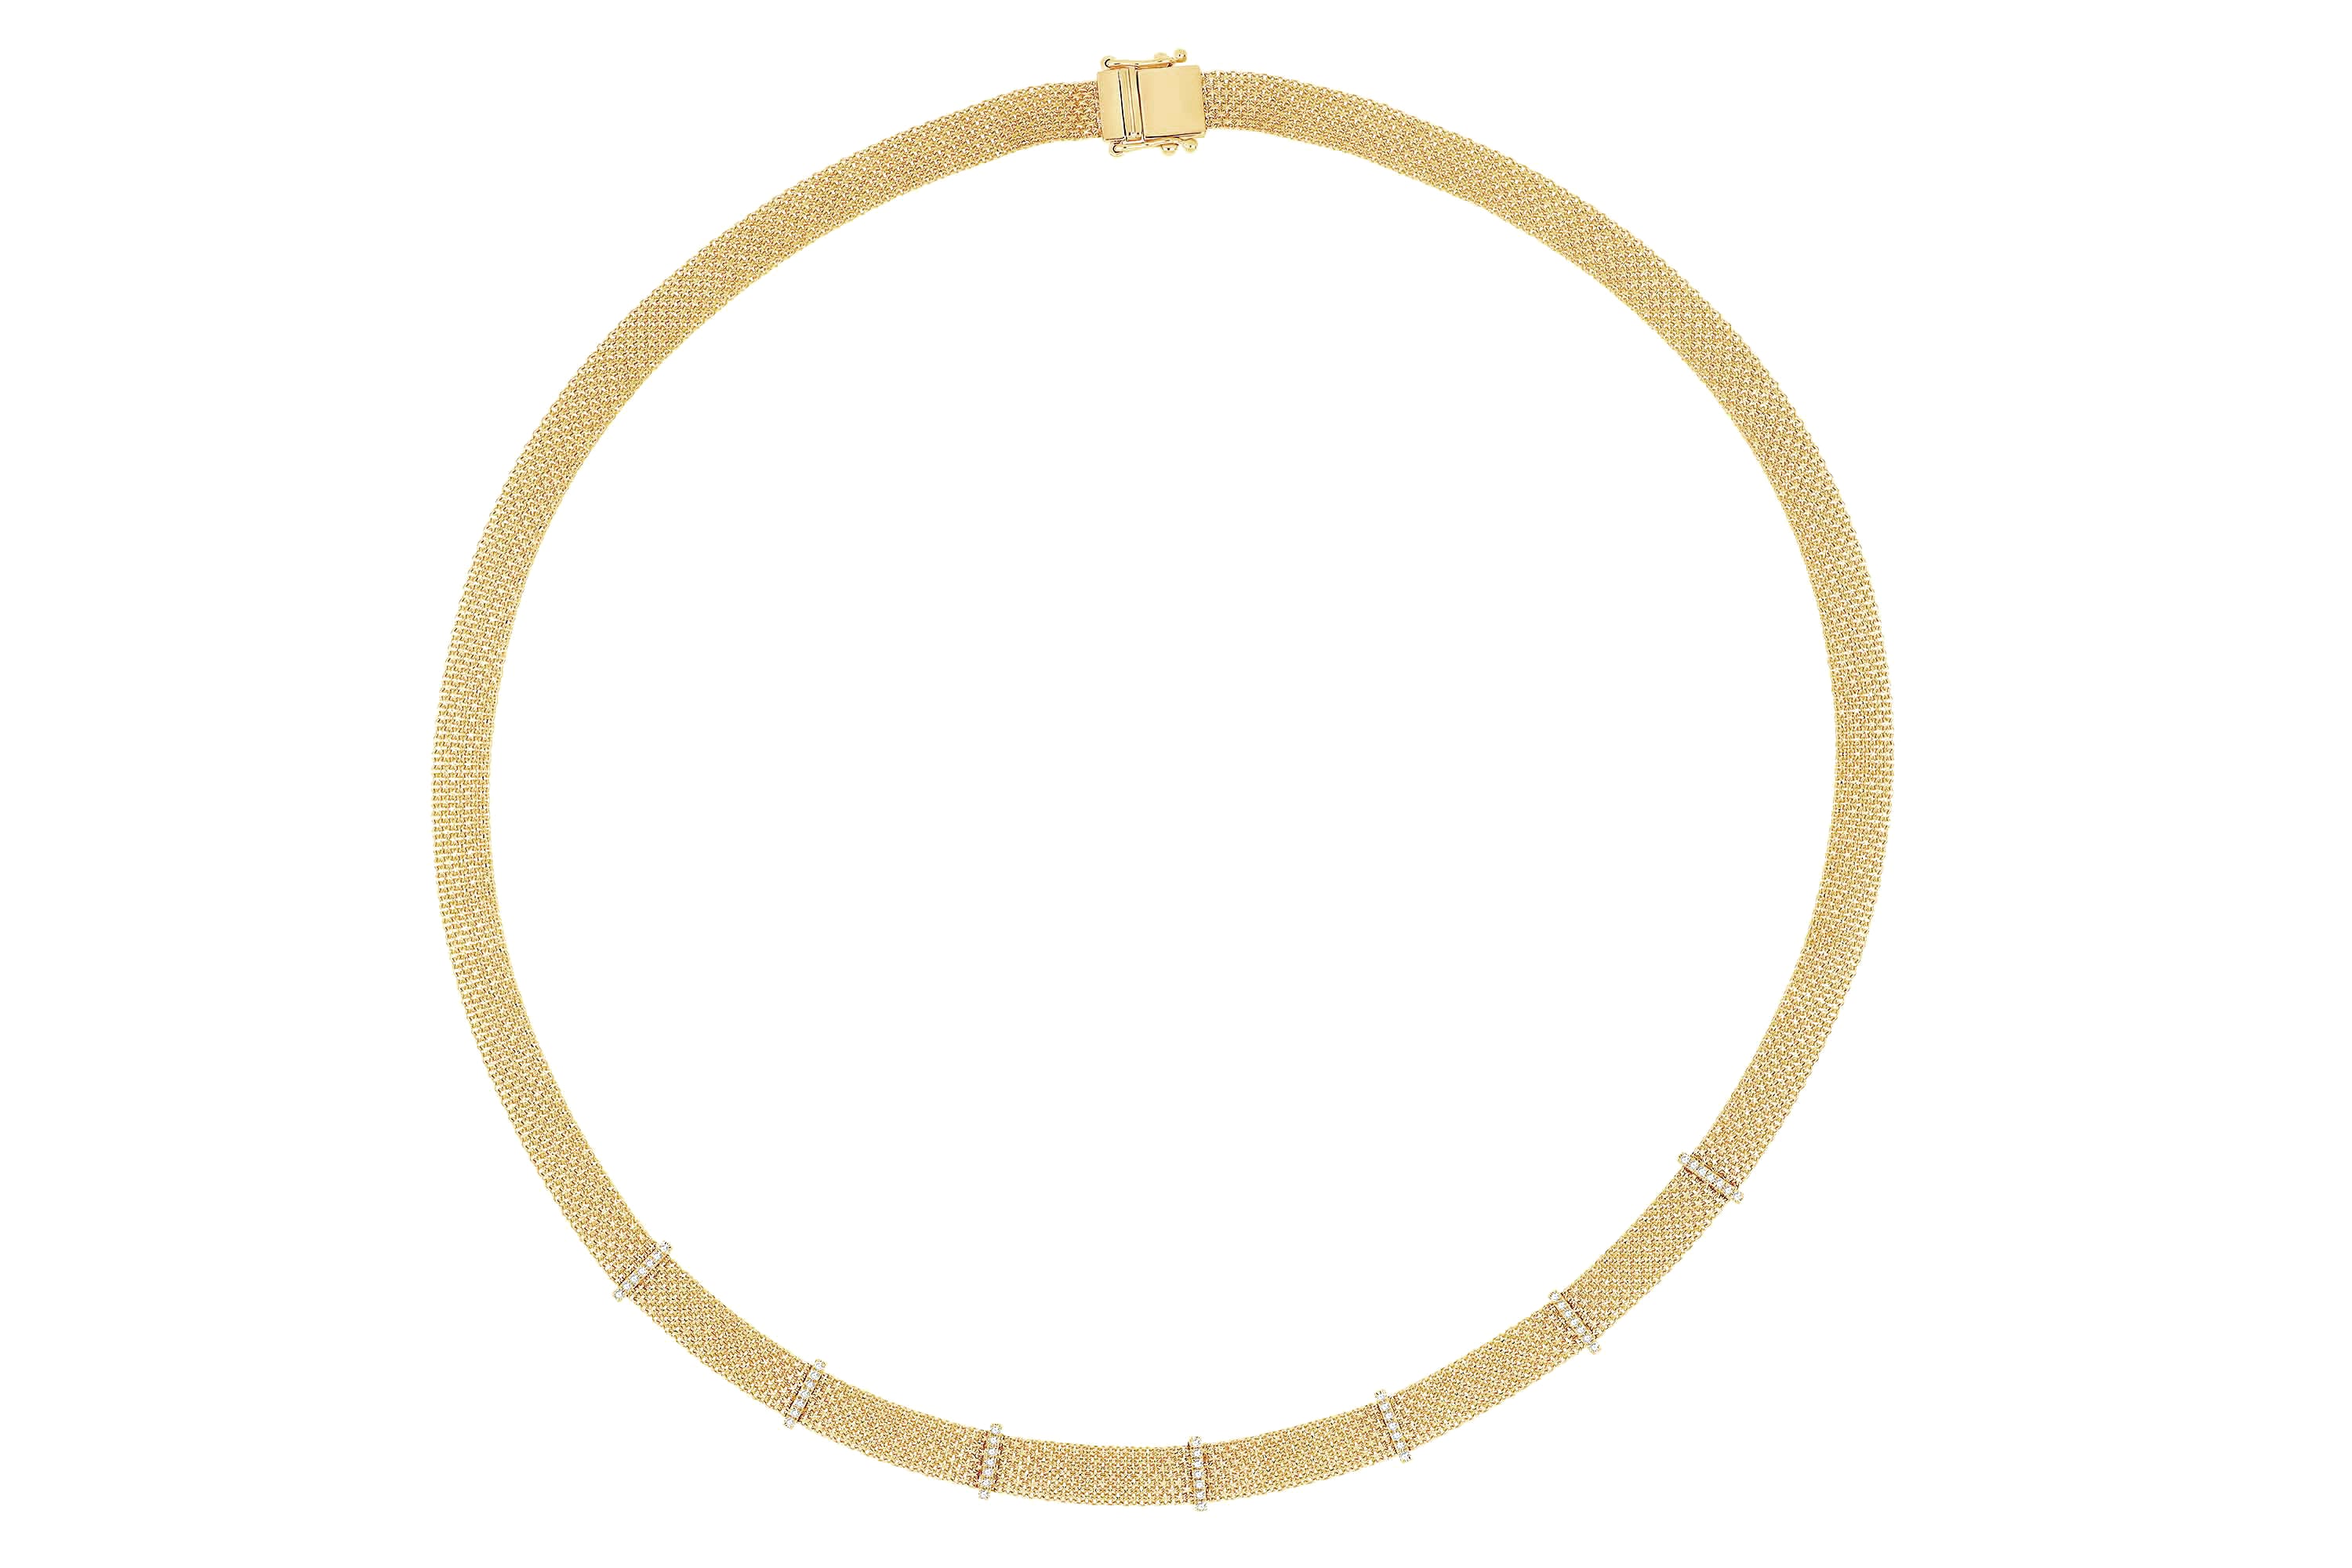 Diamond Bar Mesh Necklace in 14k yellow gold